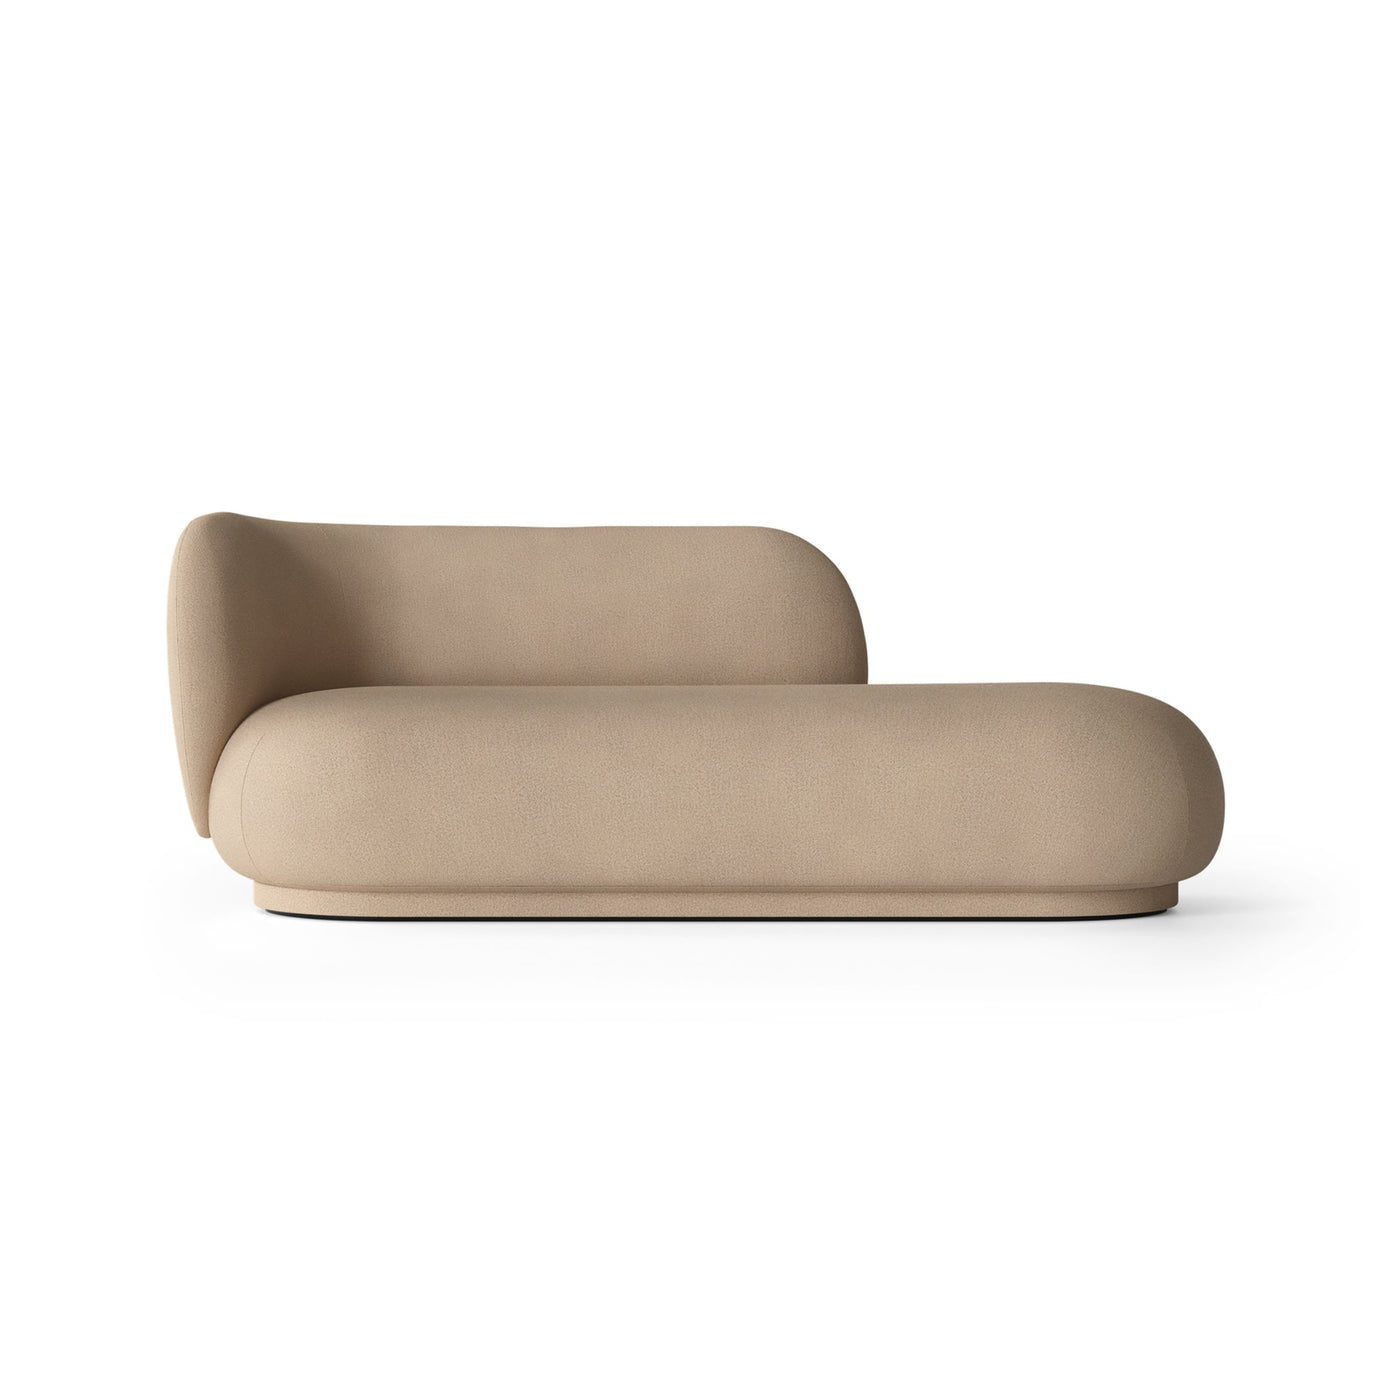 ferm living rico divan in sand soft fabric. Available from someday designs. #colour_sand-soft